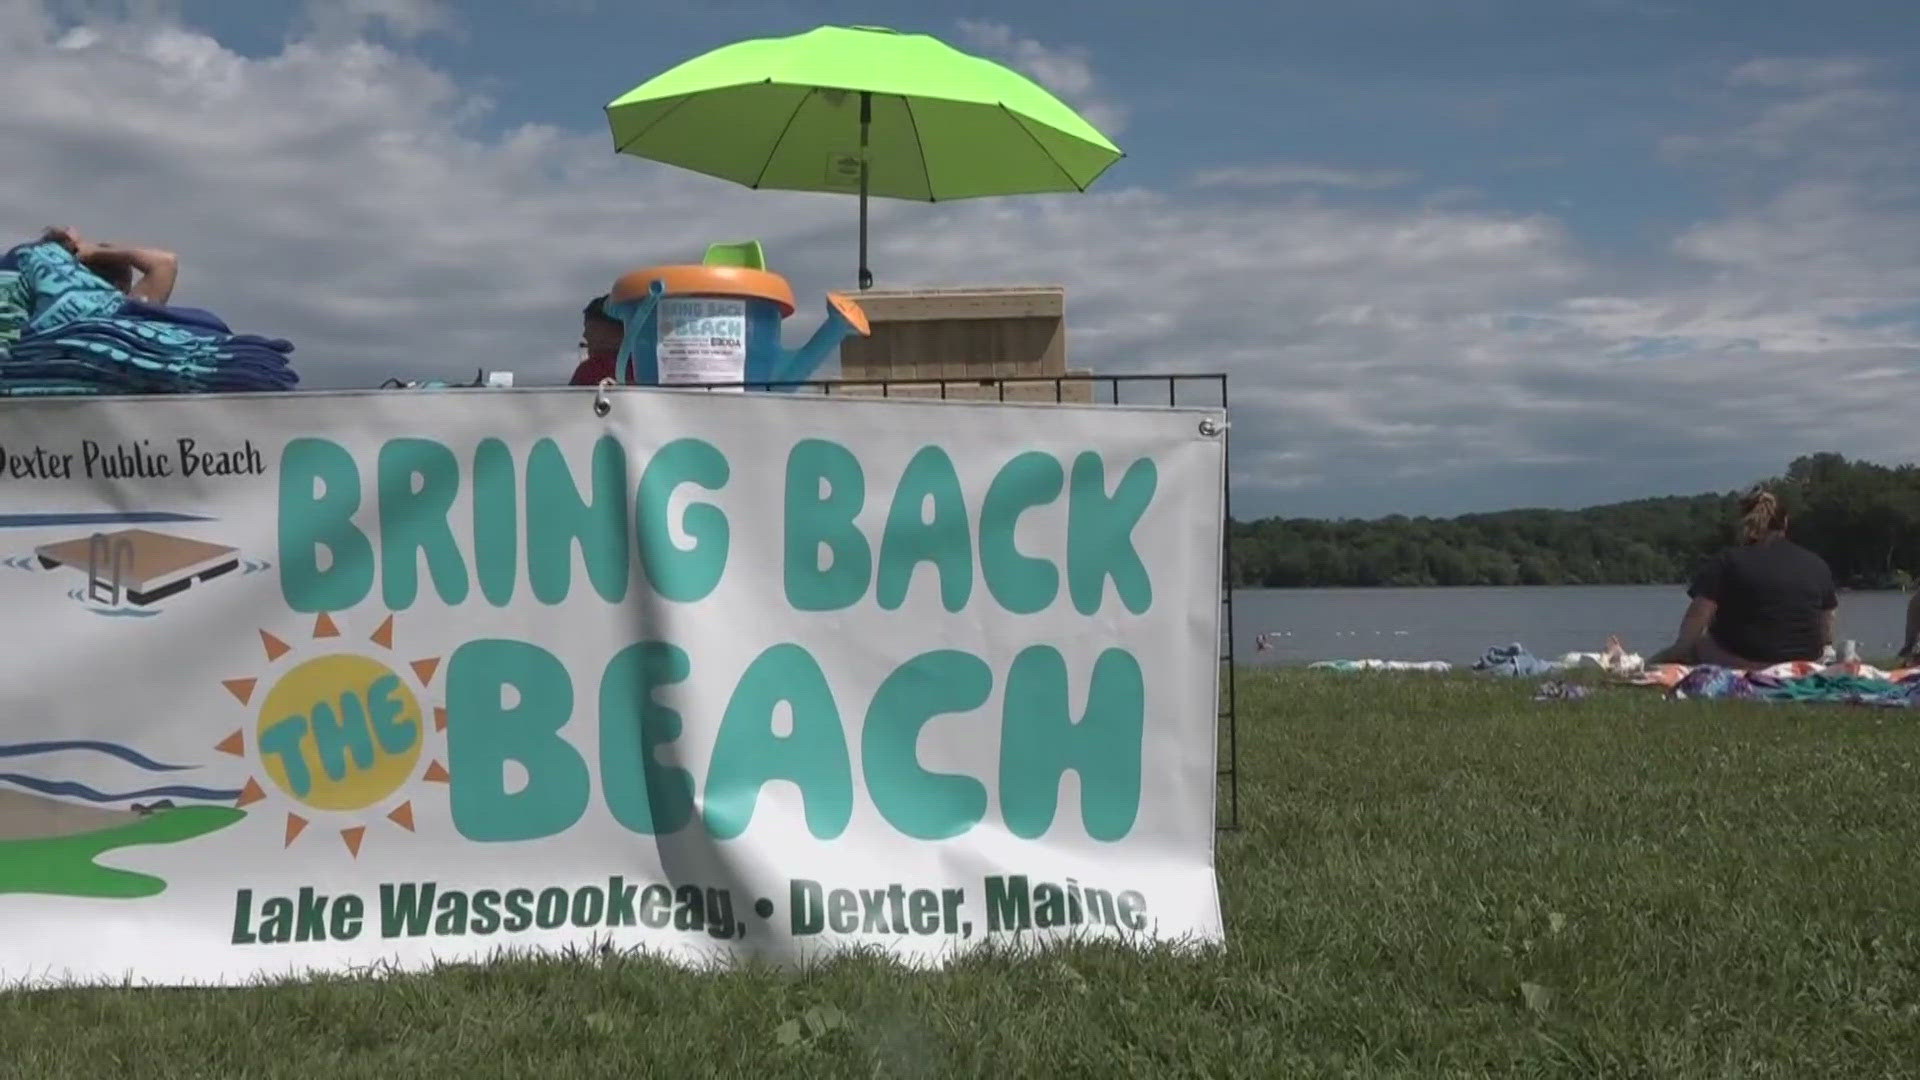 What once was a beach described as being covered in trash is back to being the popular family vacation spot it used to be.